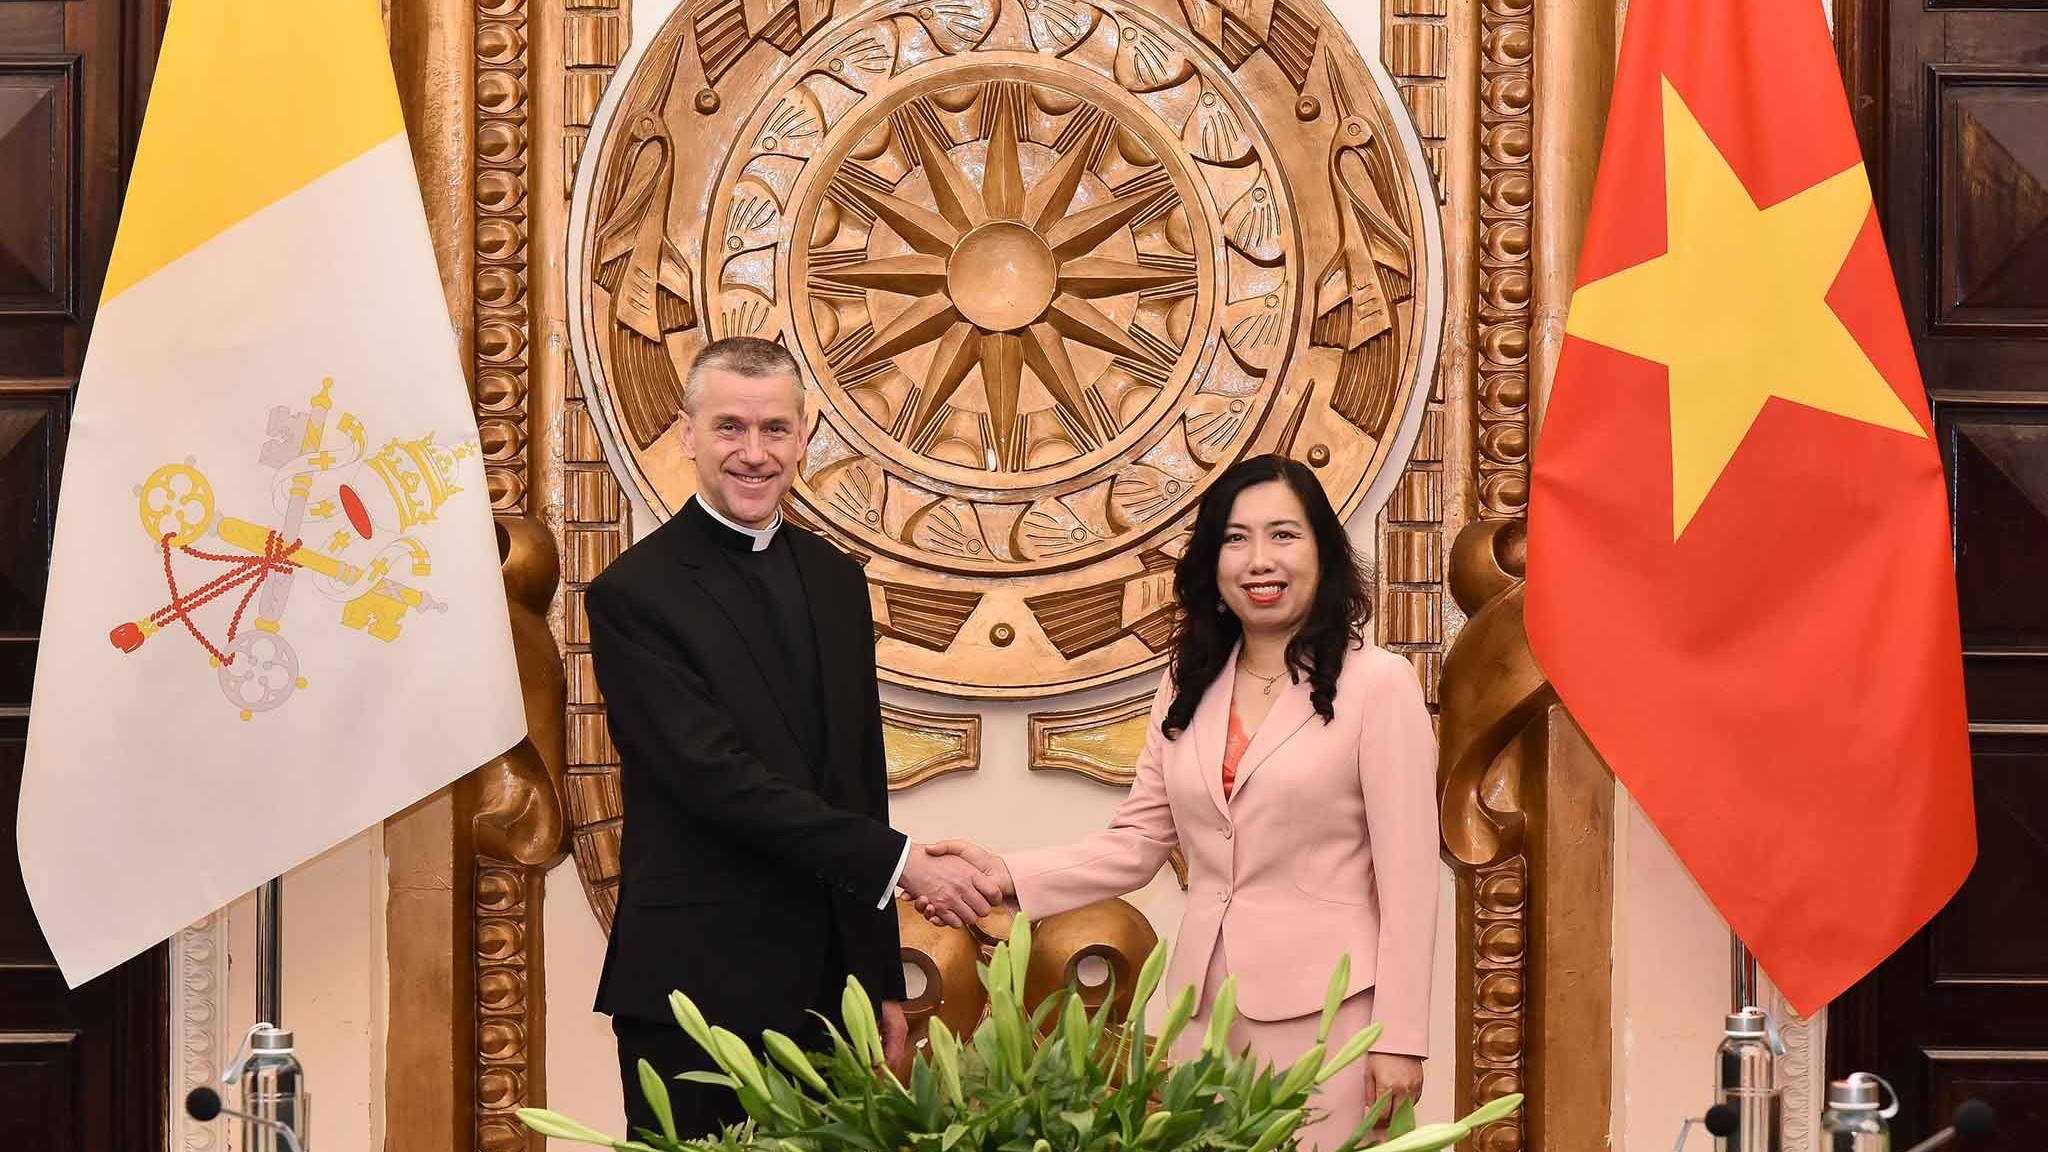 Vietnam, Holy See agree to increase exchange of high-ranking delegations, meetings